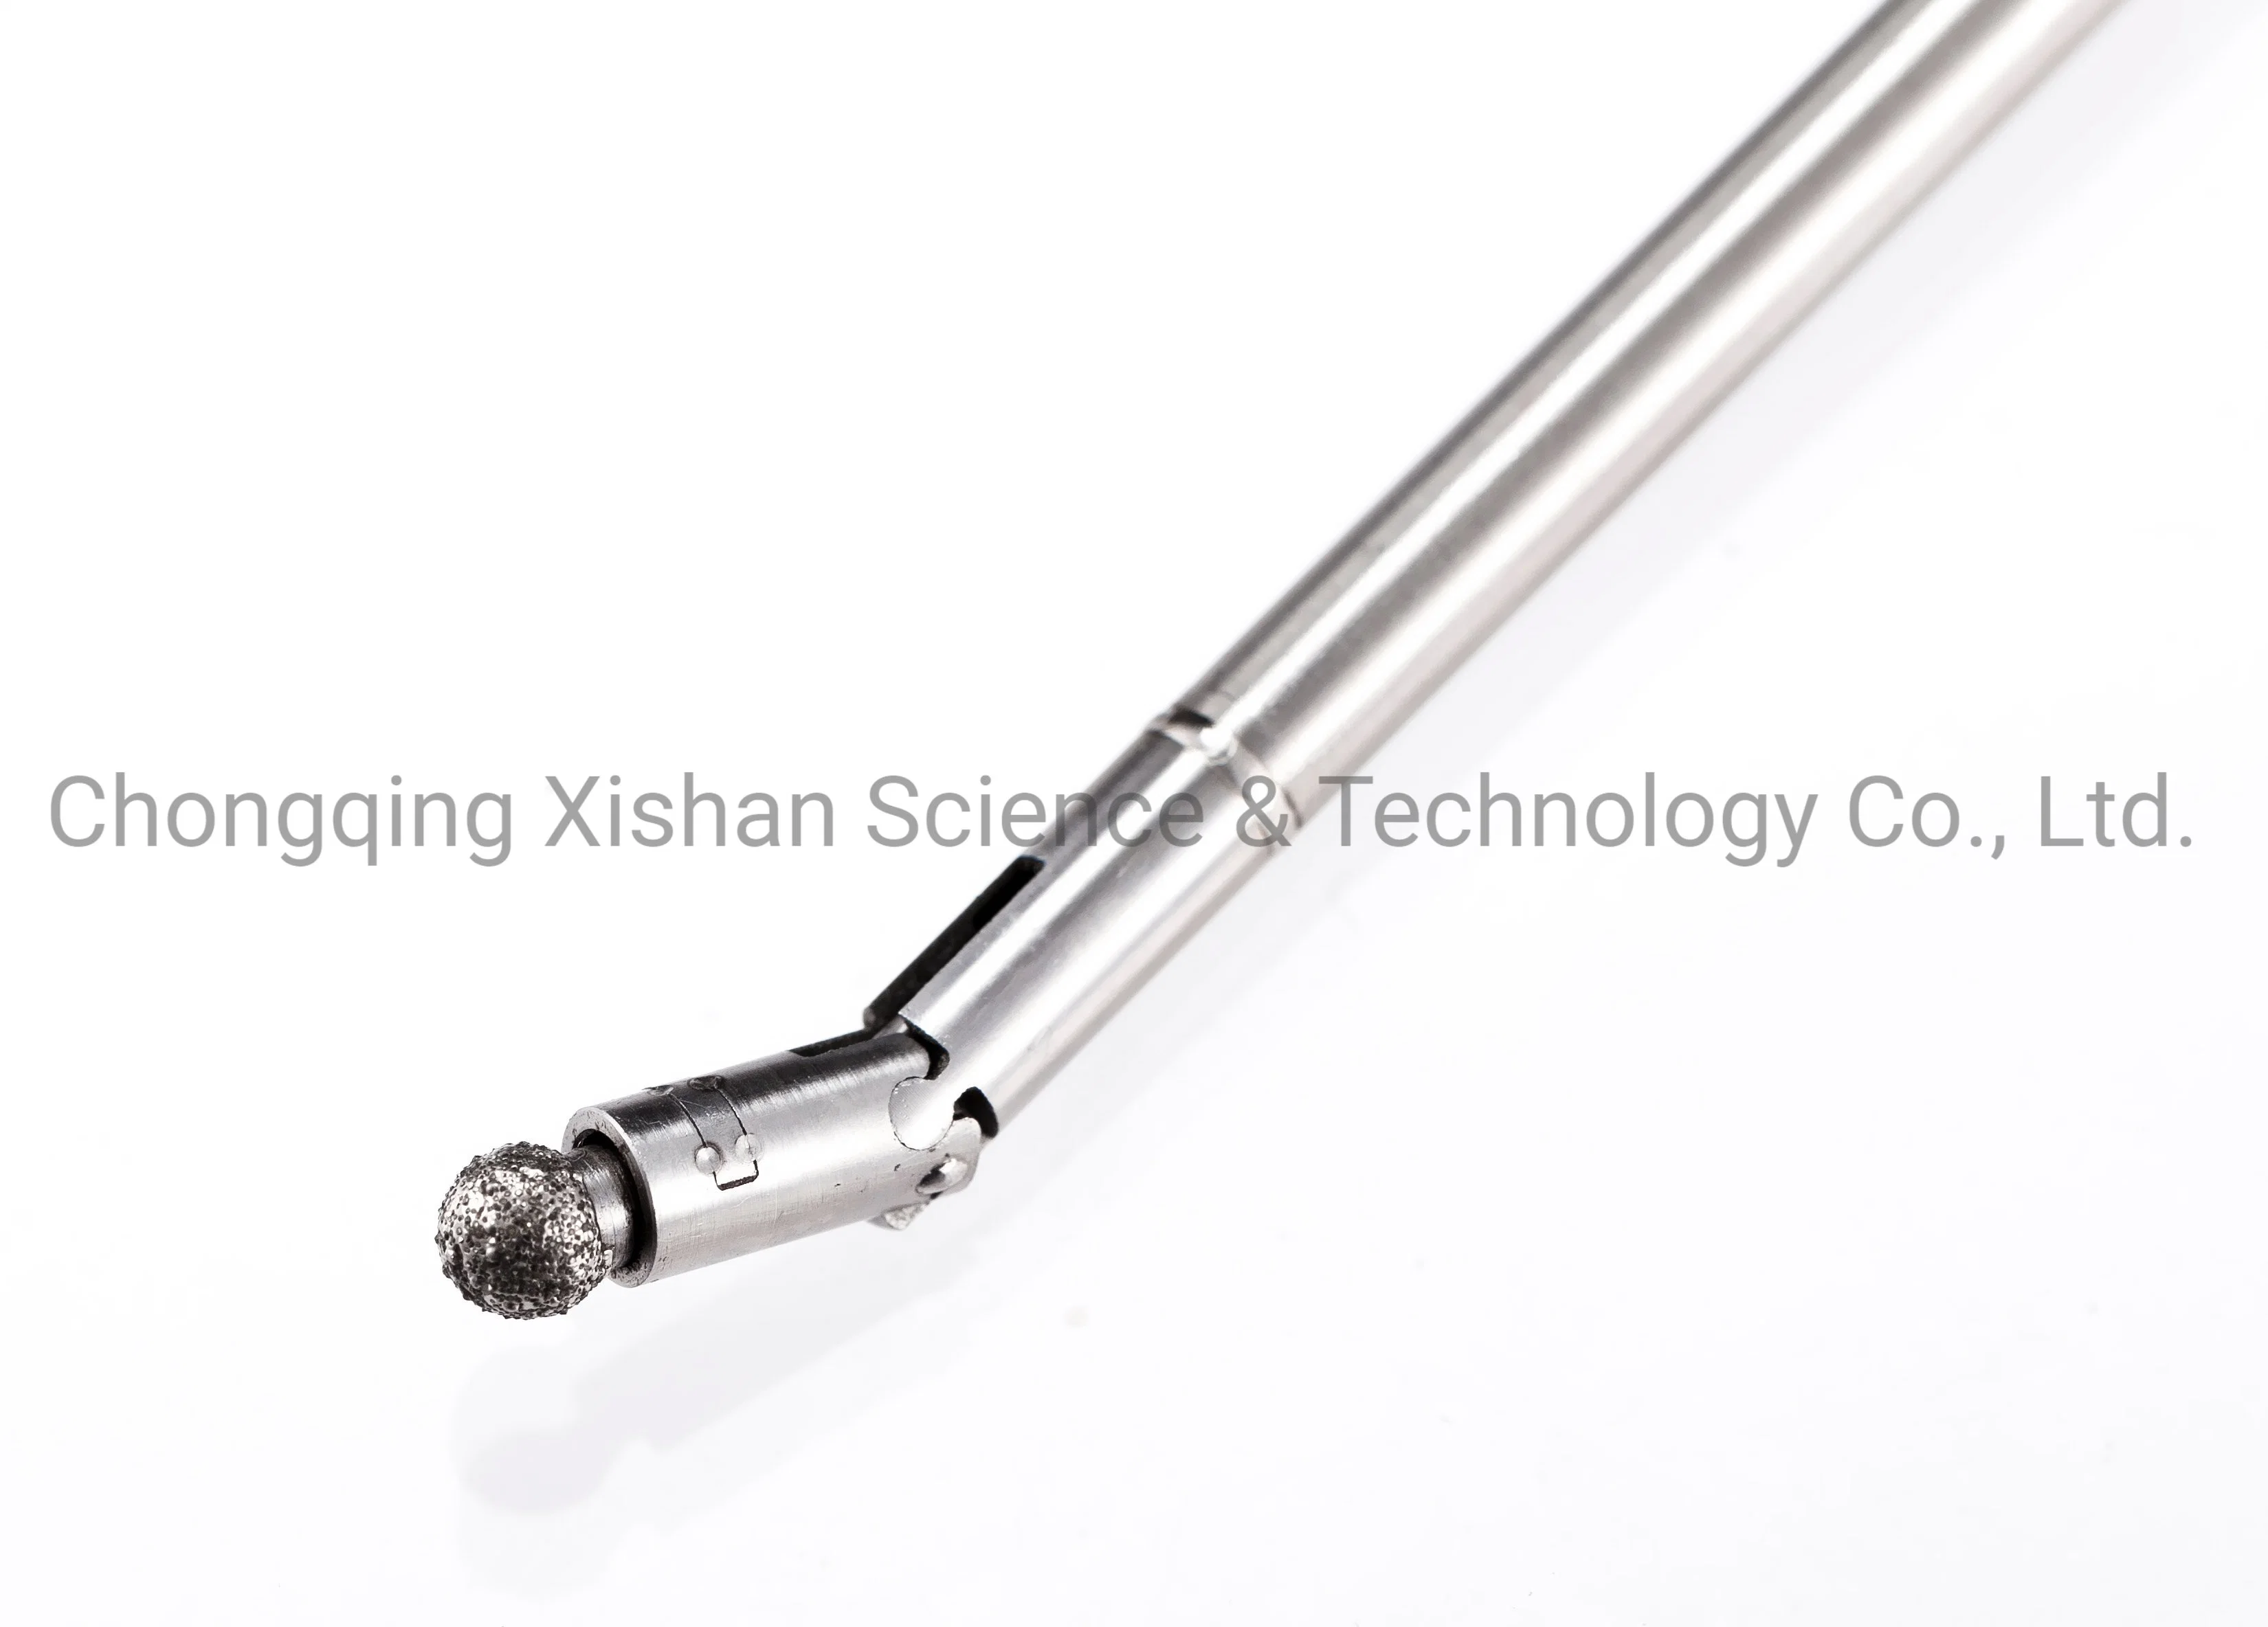 Endoscopic Spinal Drill System/Spinal Power Machine/Surgical Drill for Spine/Spinal Bur